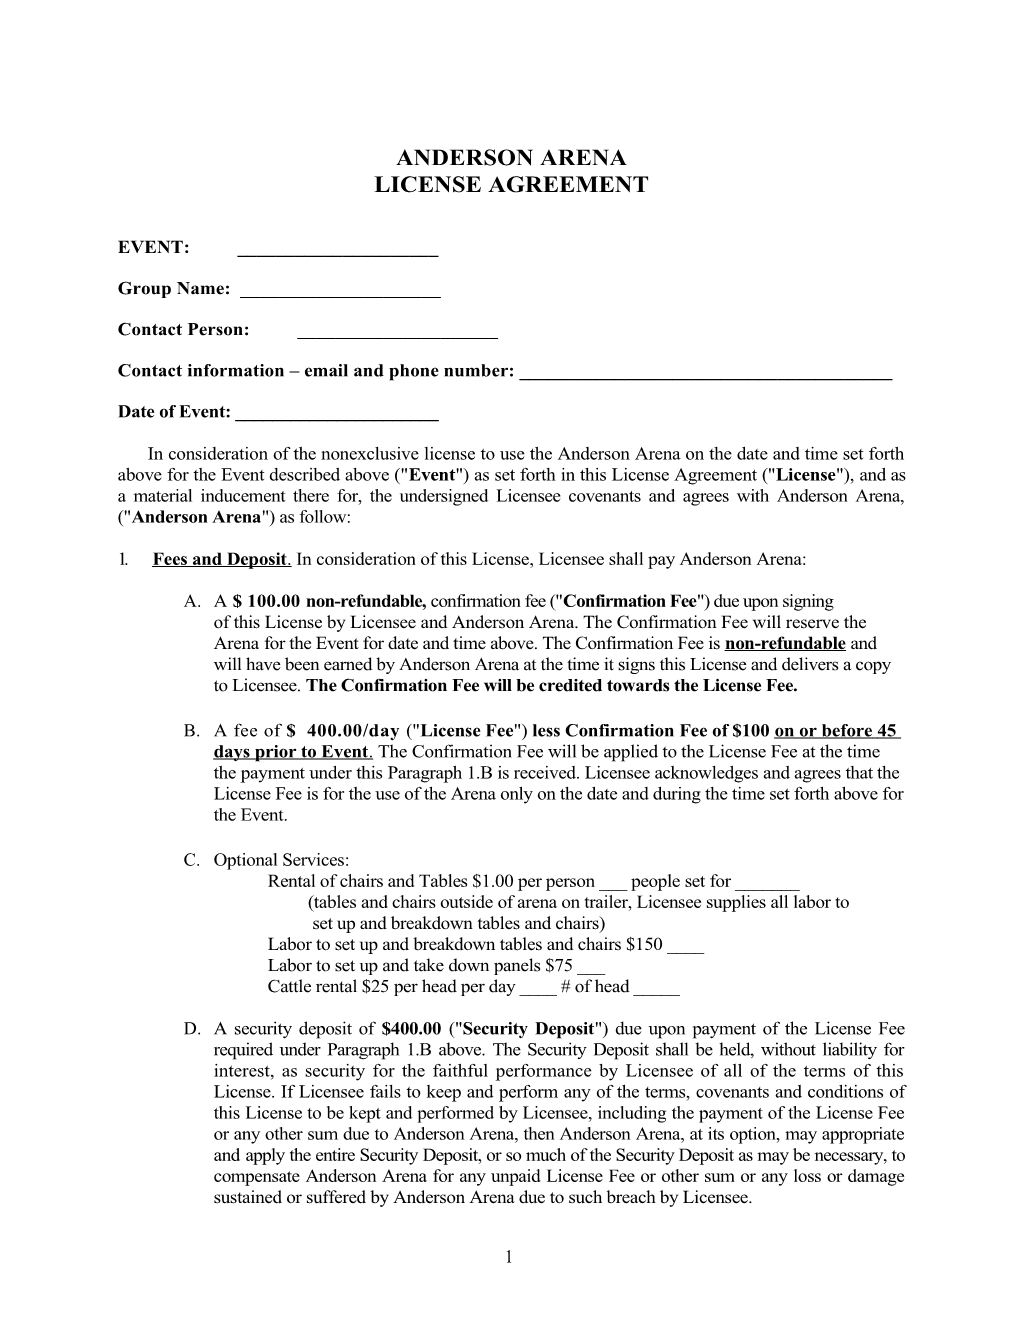 Anderson Arena License Agreement